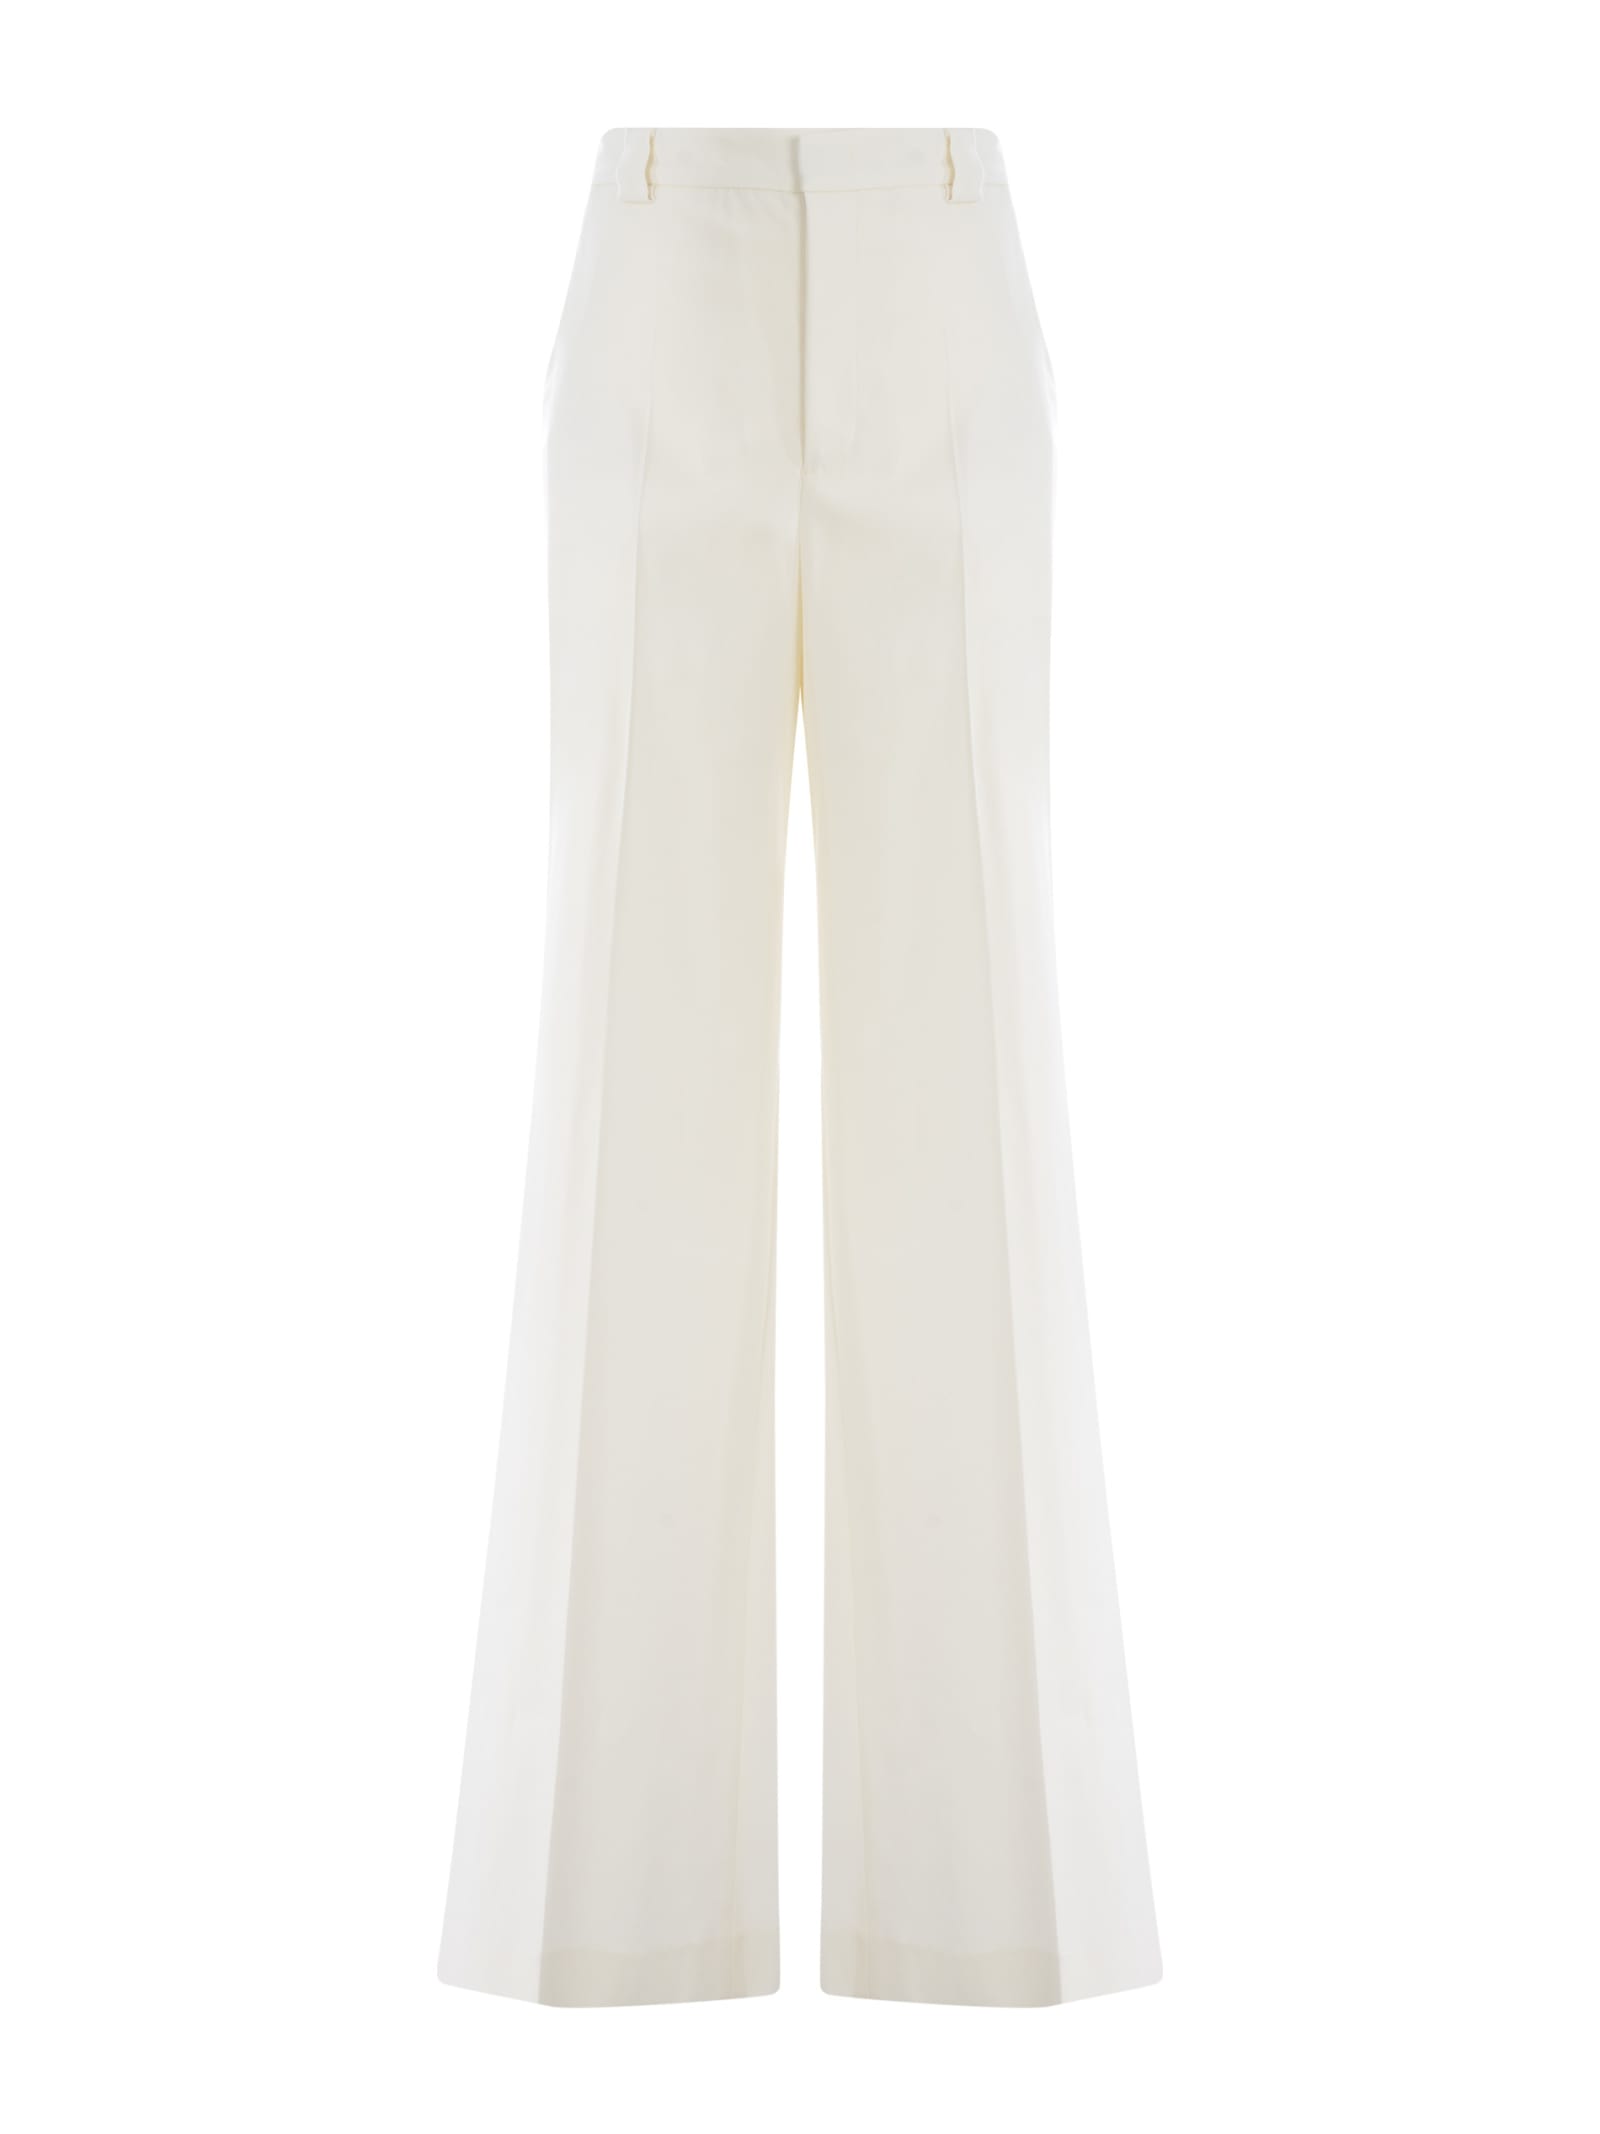 RED Valentino White Trousers In Viscose And Wool Stretch Gabardine